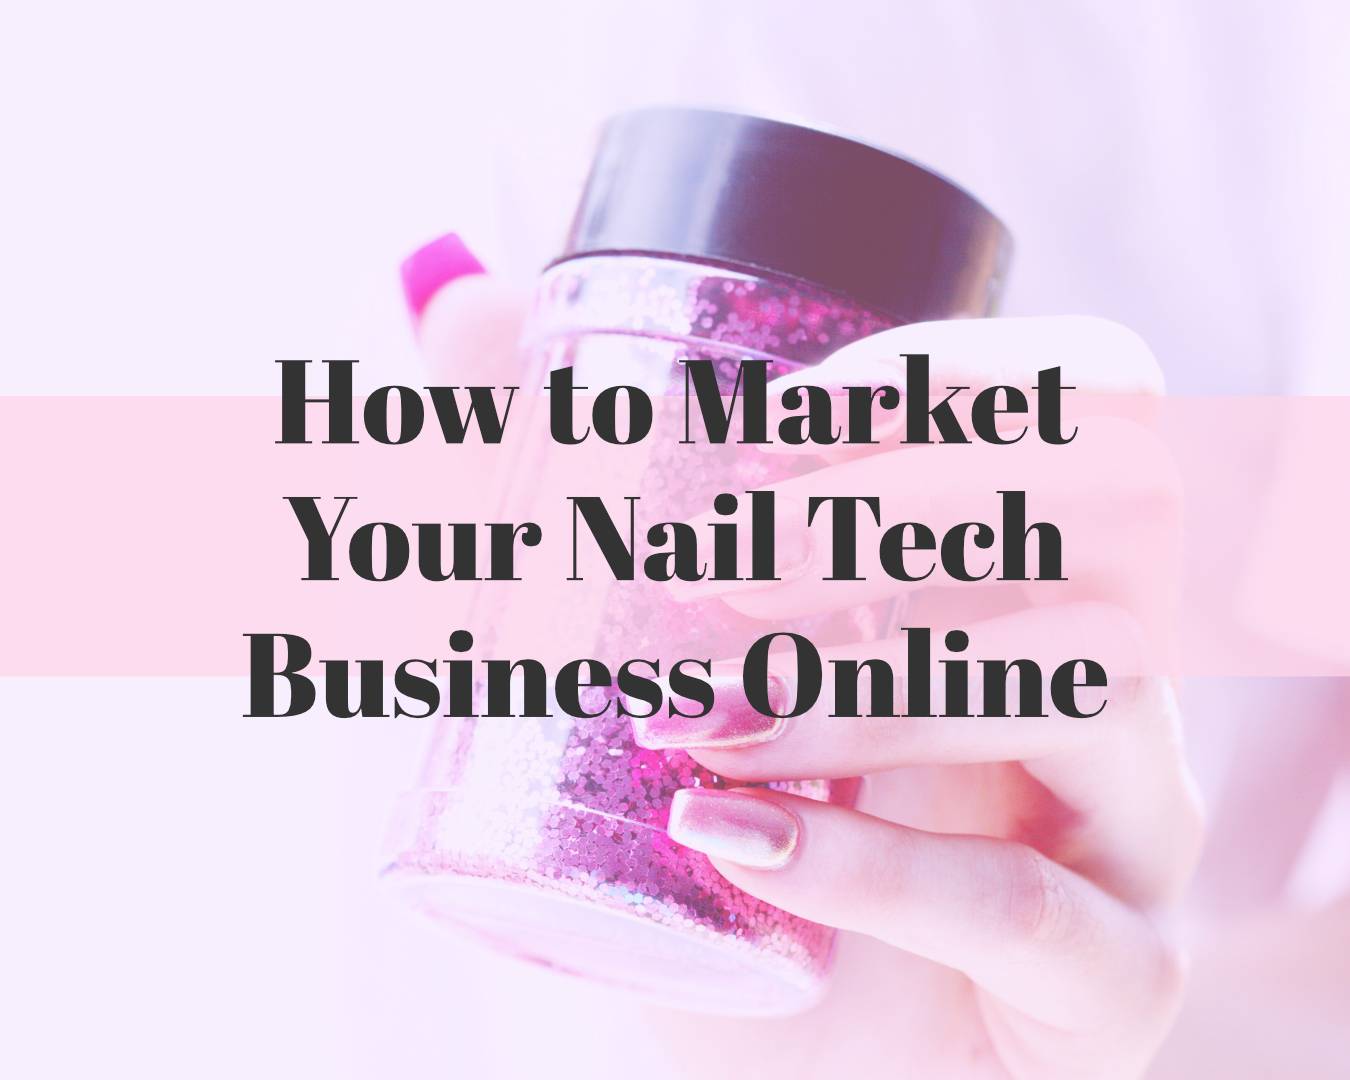 Nail Art Market Size and Share - wide 8